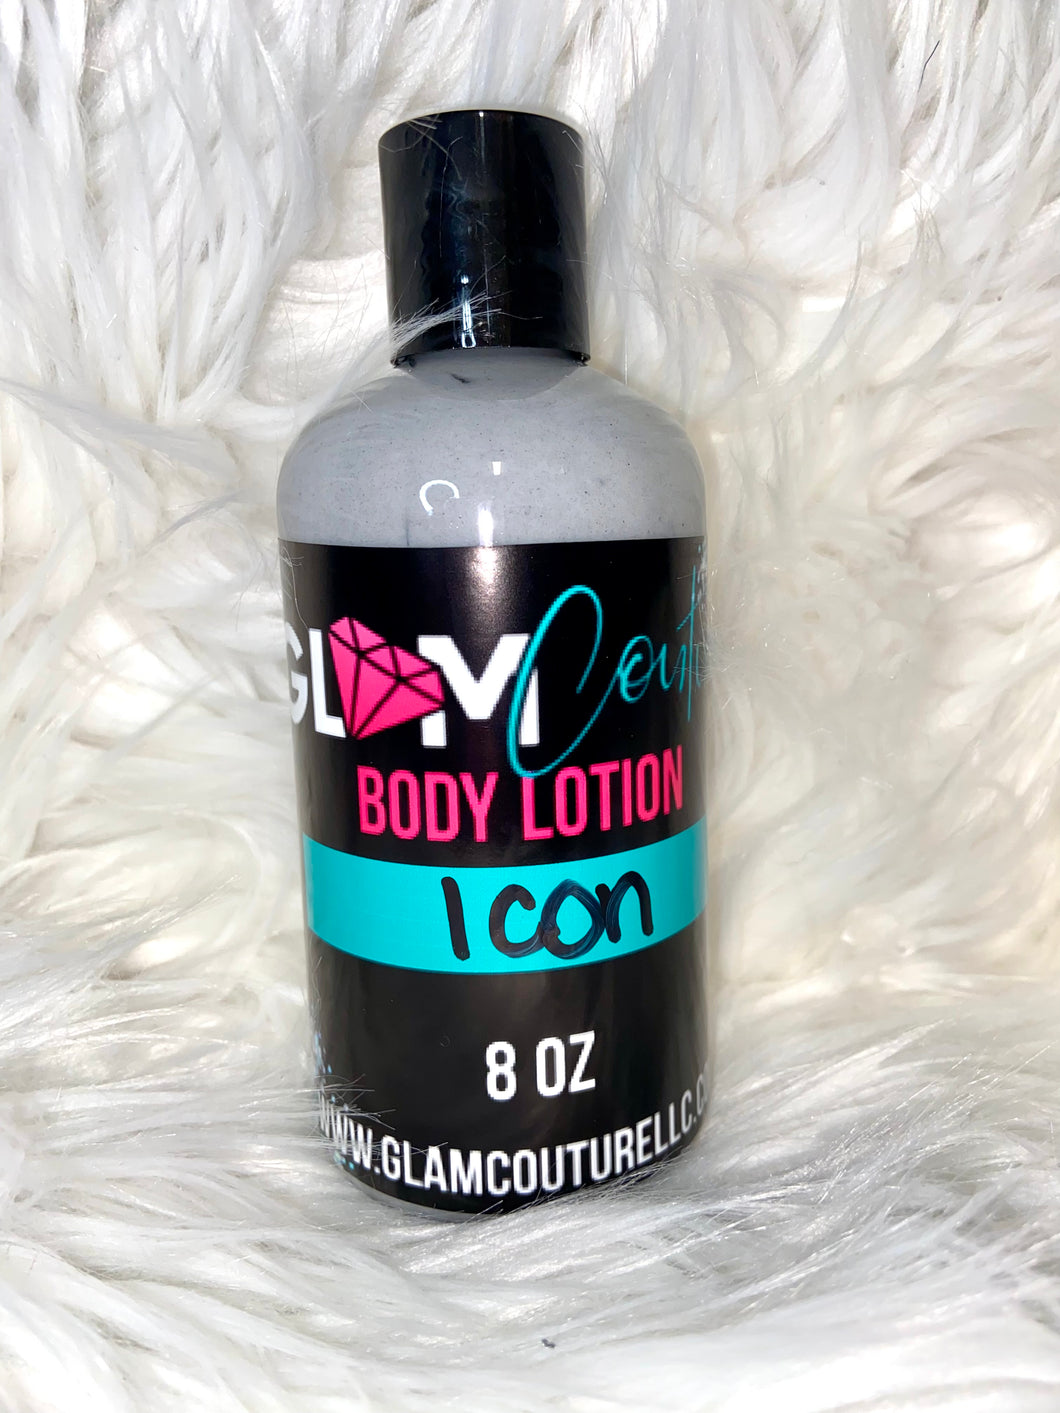 Glam Couture Body Care™ - Icon Body Lotion for men